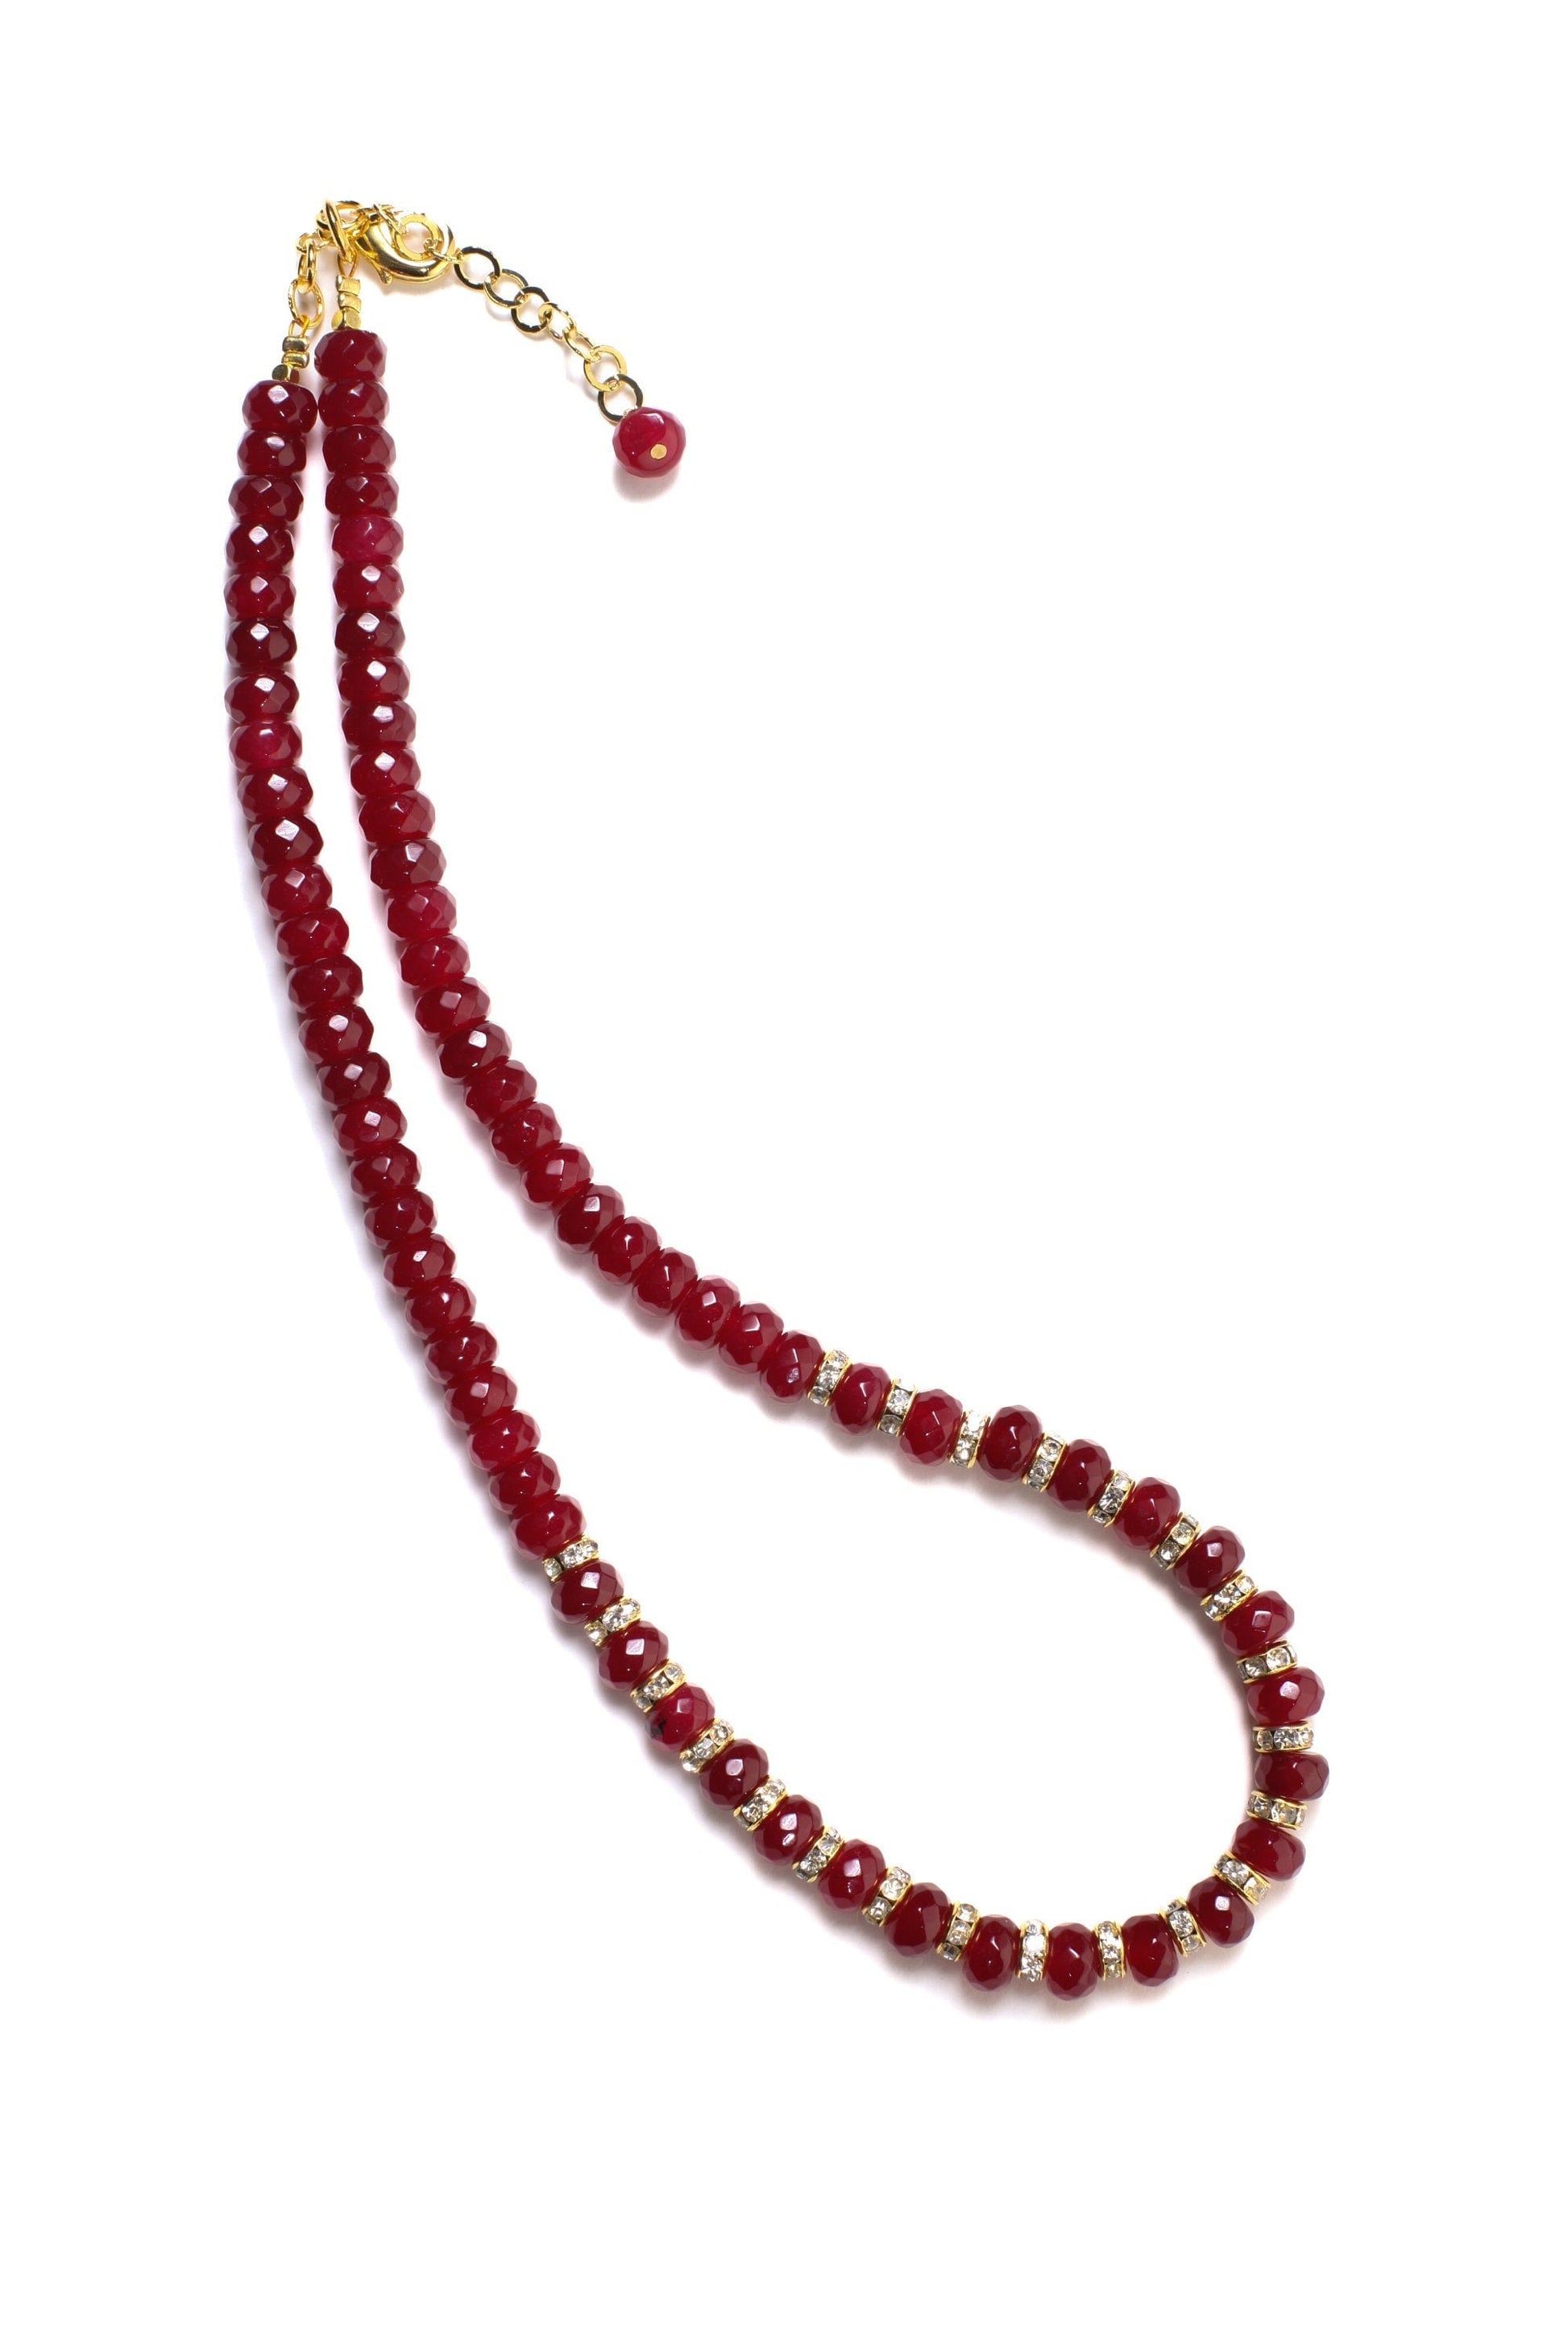 Ruby Jade Faceted Roundel with Rhinestone Spacers 18&quot; Necklace with 2&quot; Extension Chain, Choose Gold or Silver